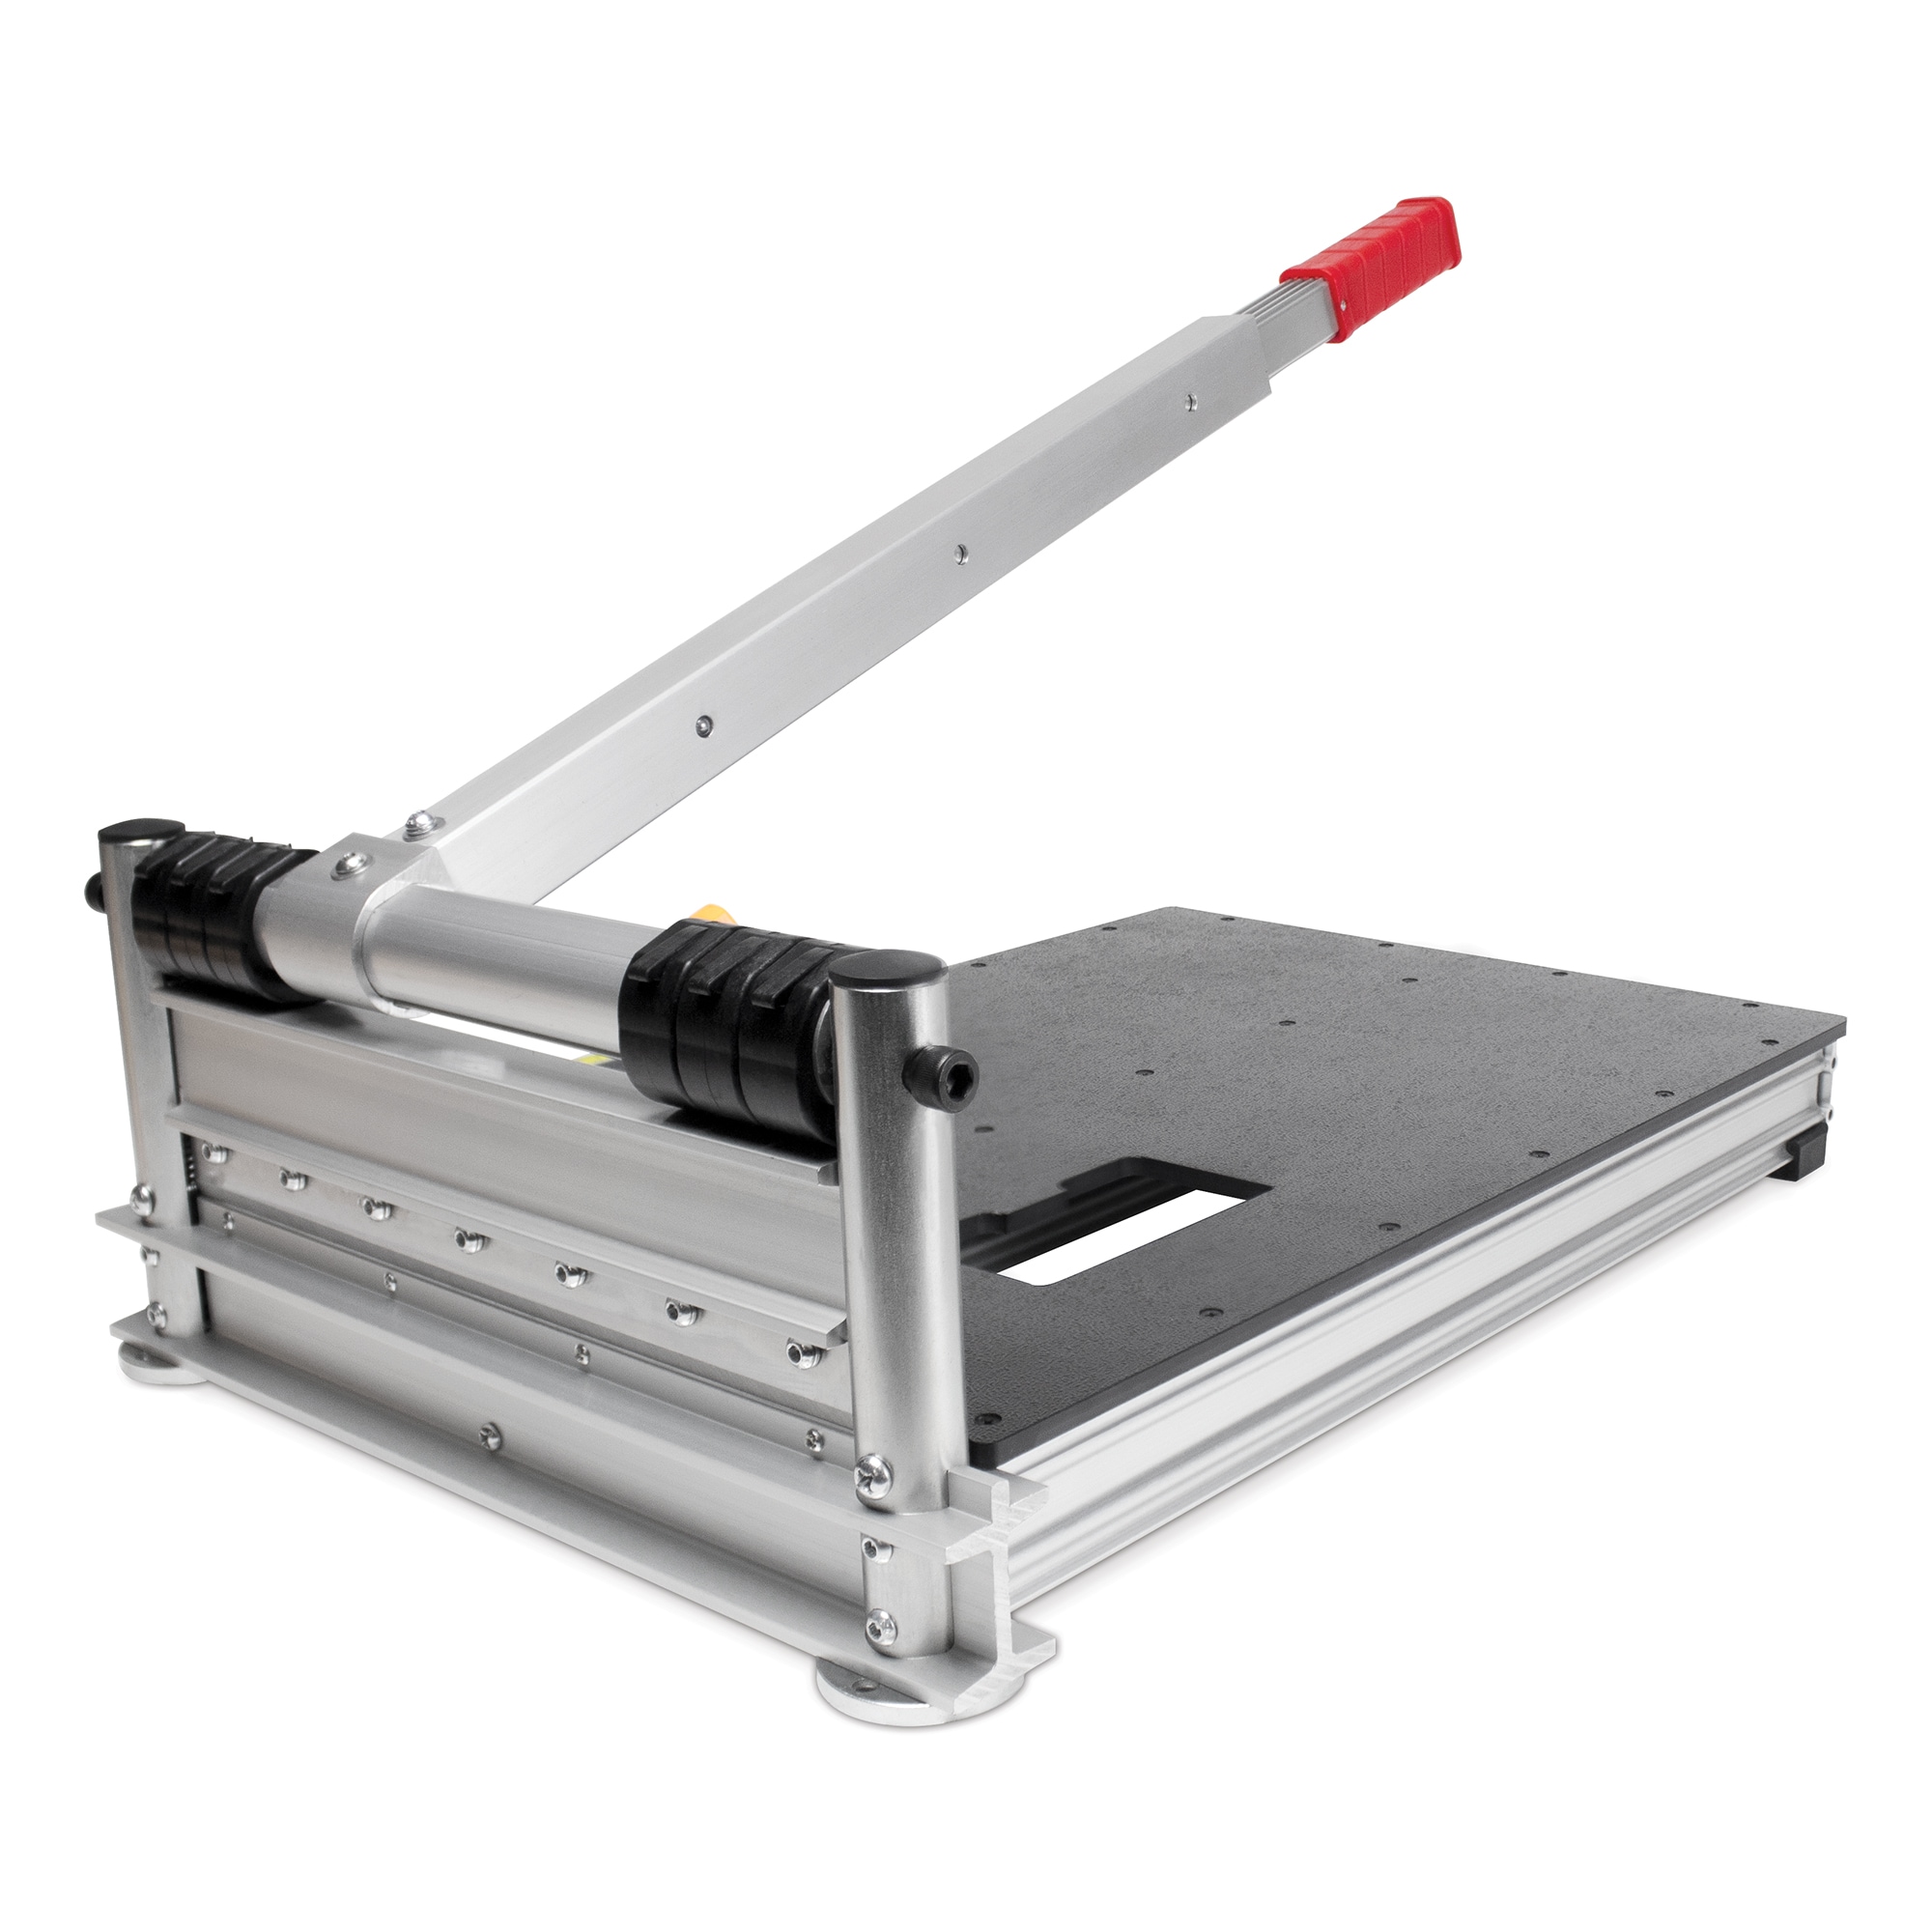 Sentinel 9in. Laminate and Vinyl Cutter Pro